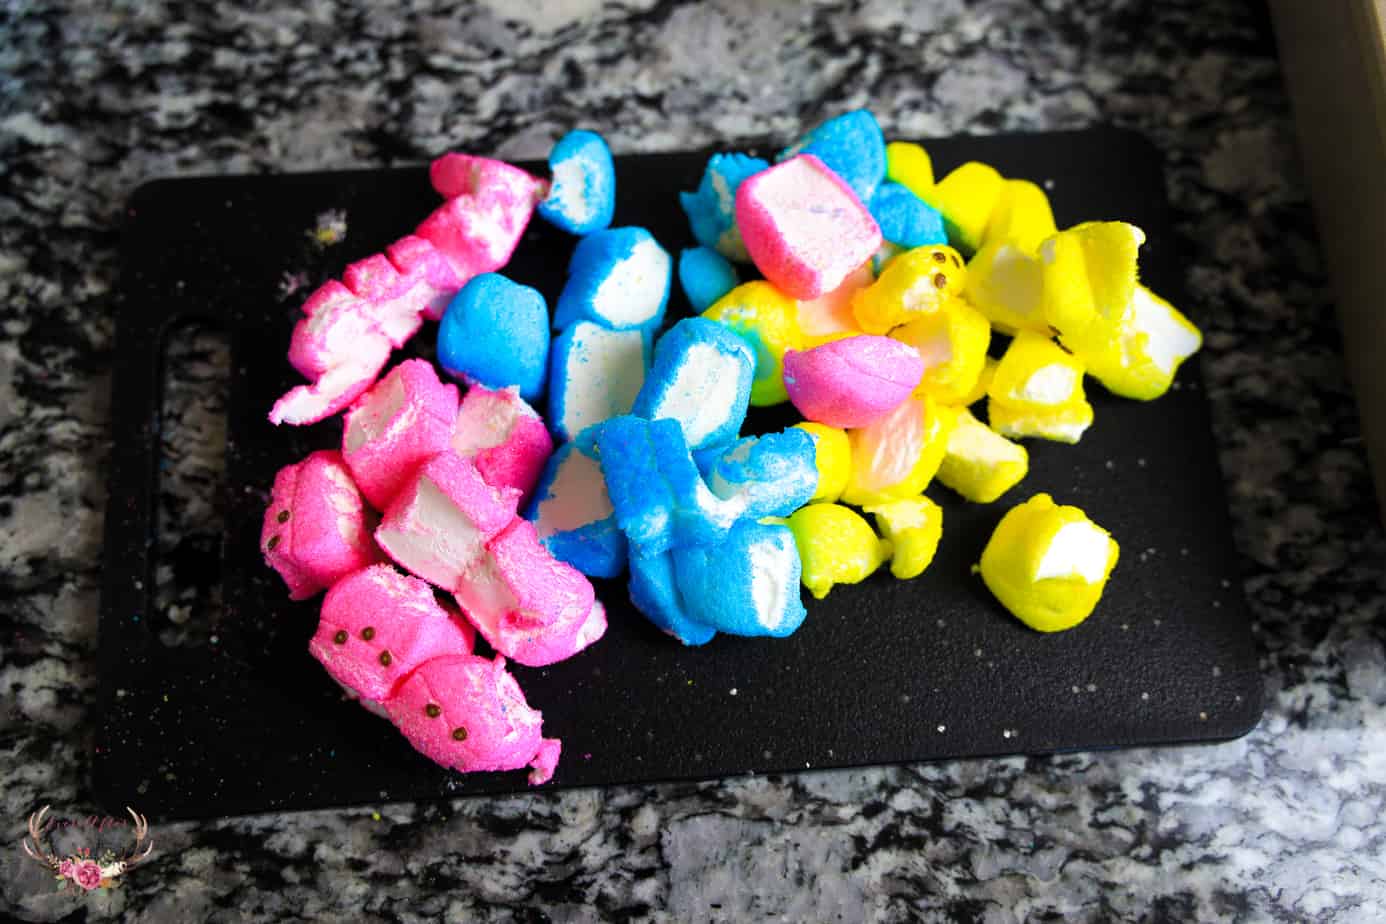 How to Make Peeps Marshmallow Ice Cream at Home